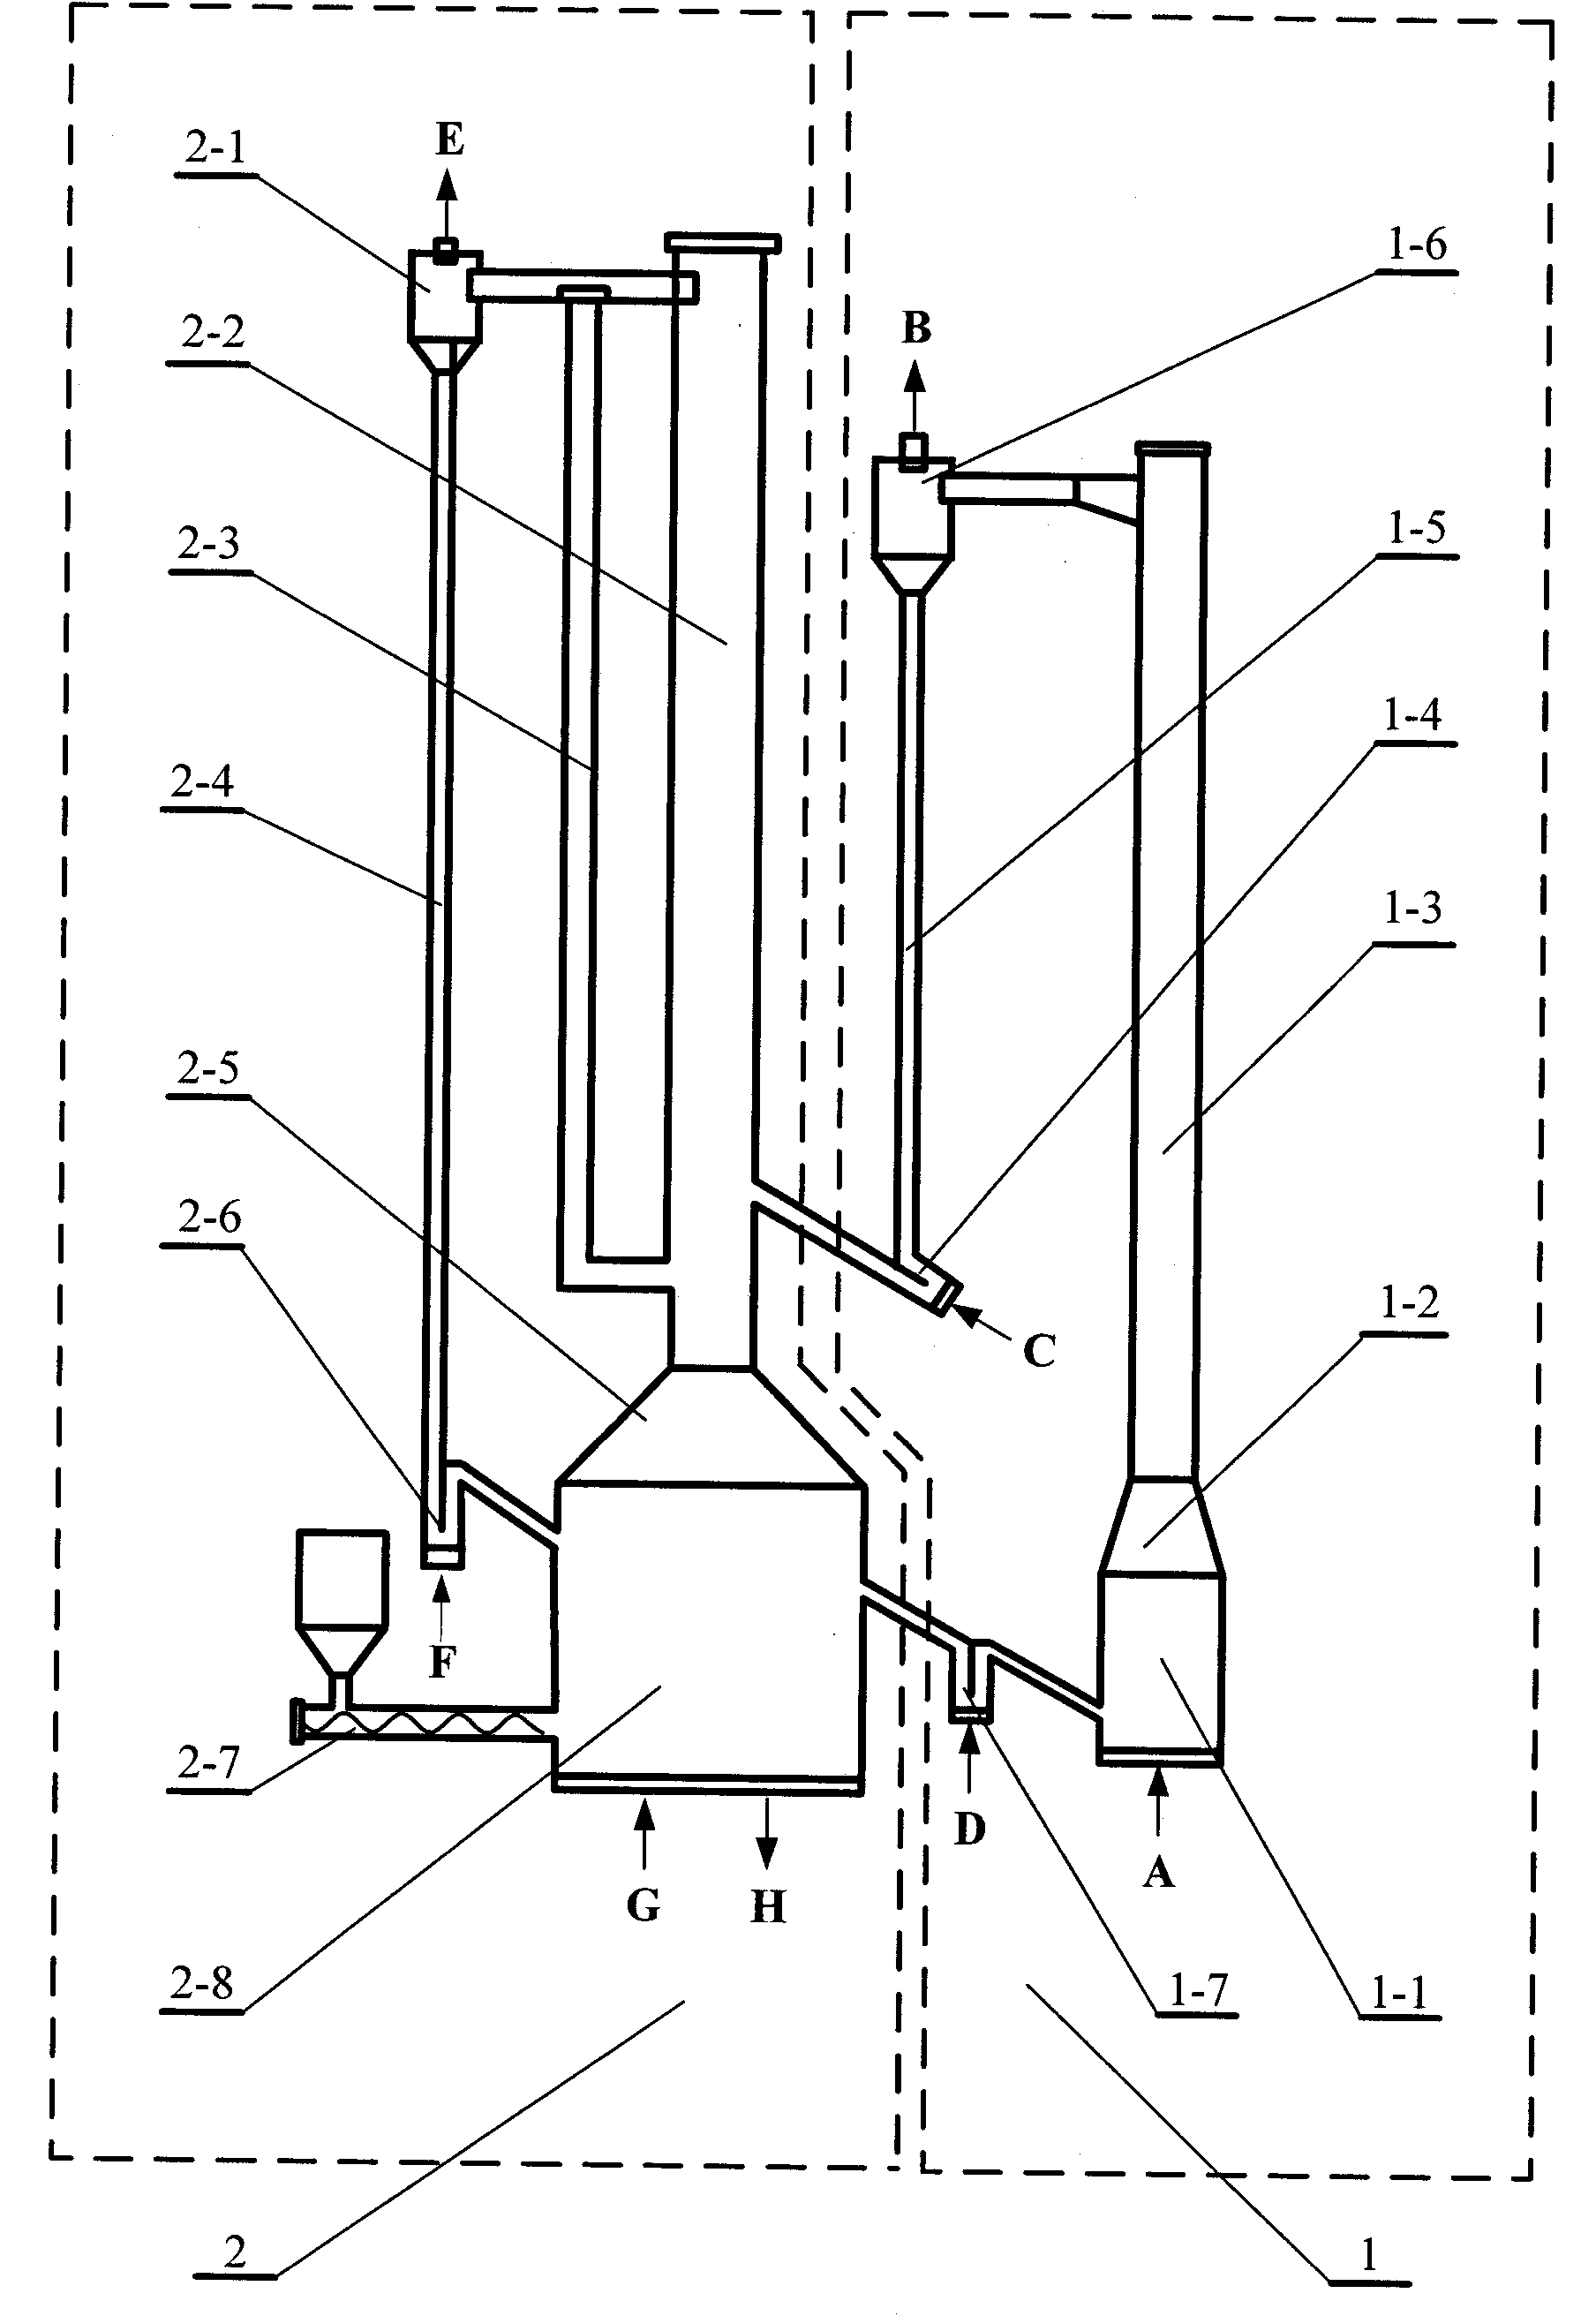 Method and device based on coal gasification for preparing hydrogen and separating CO2